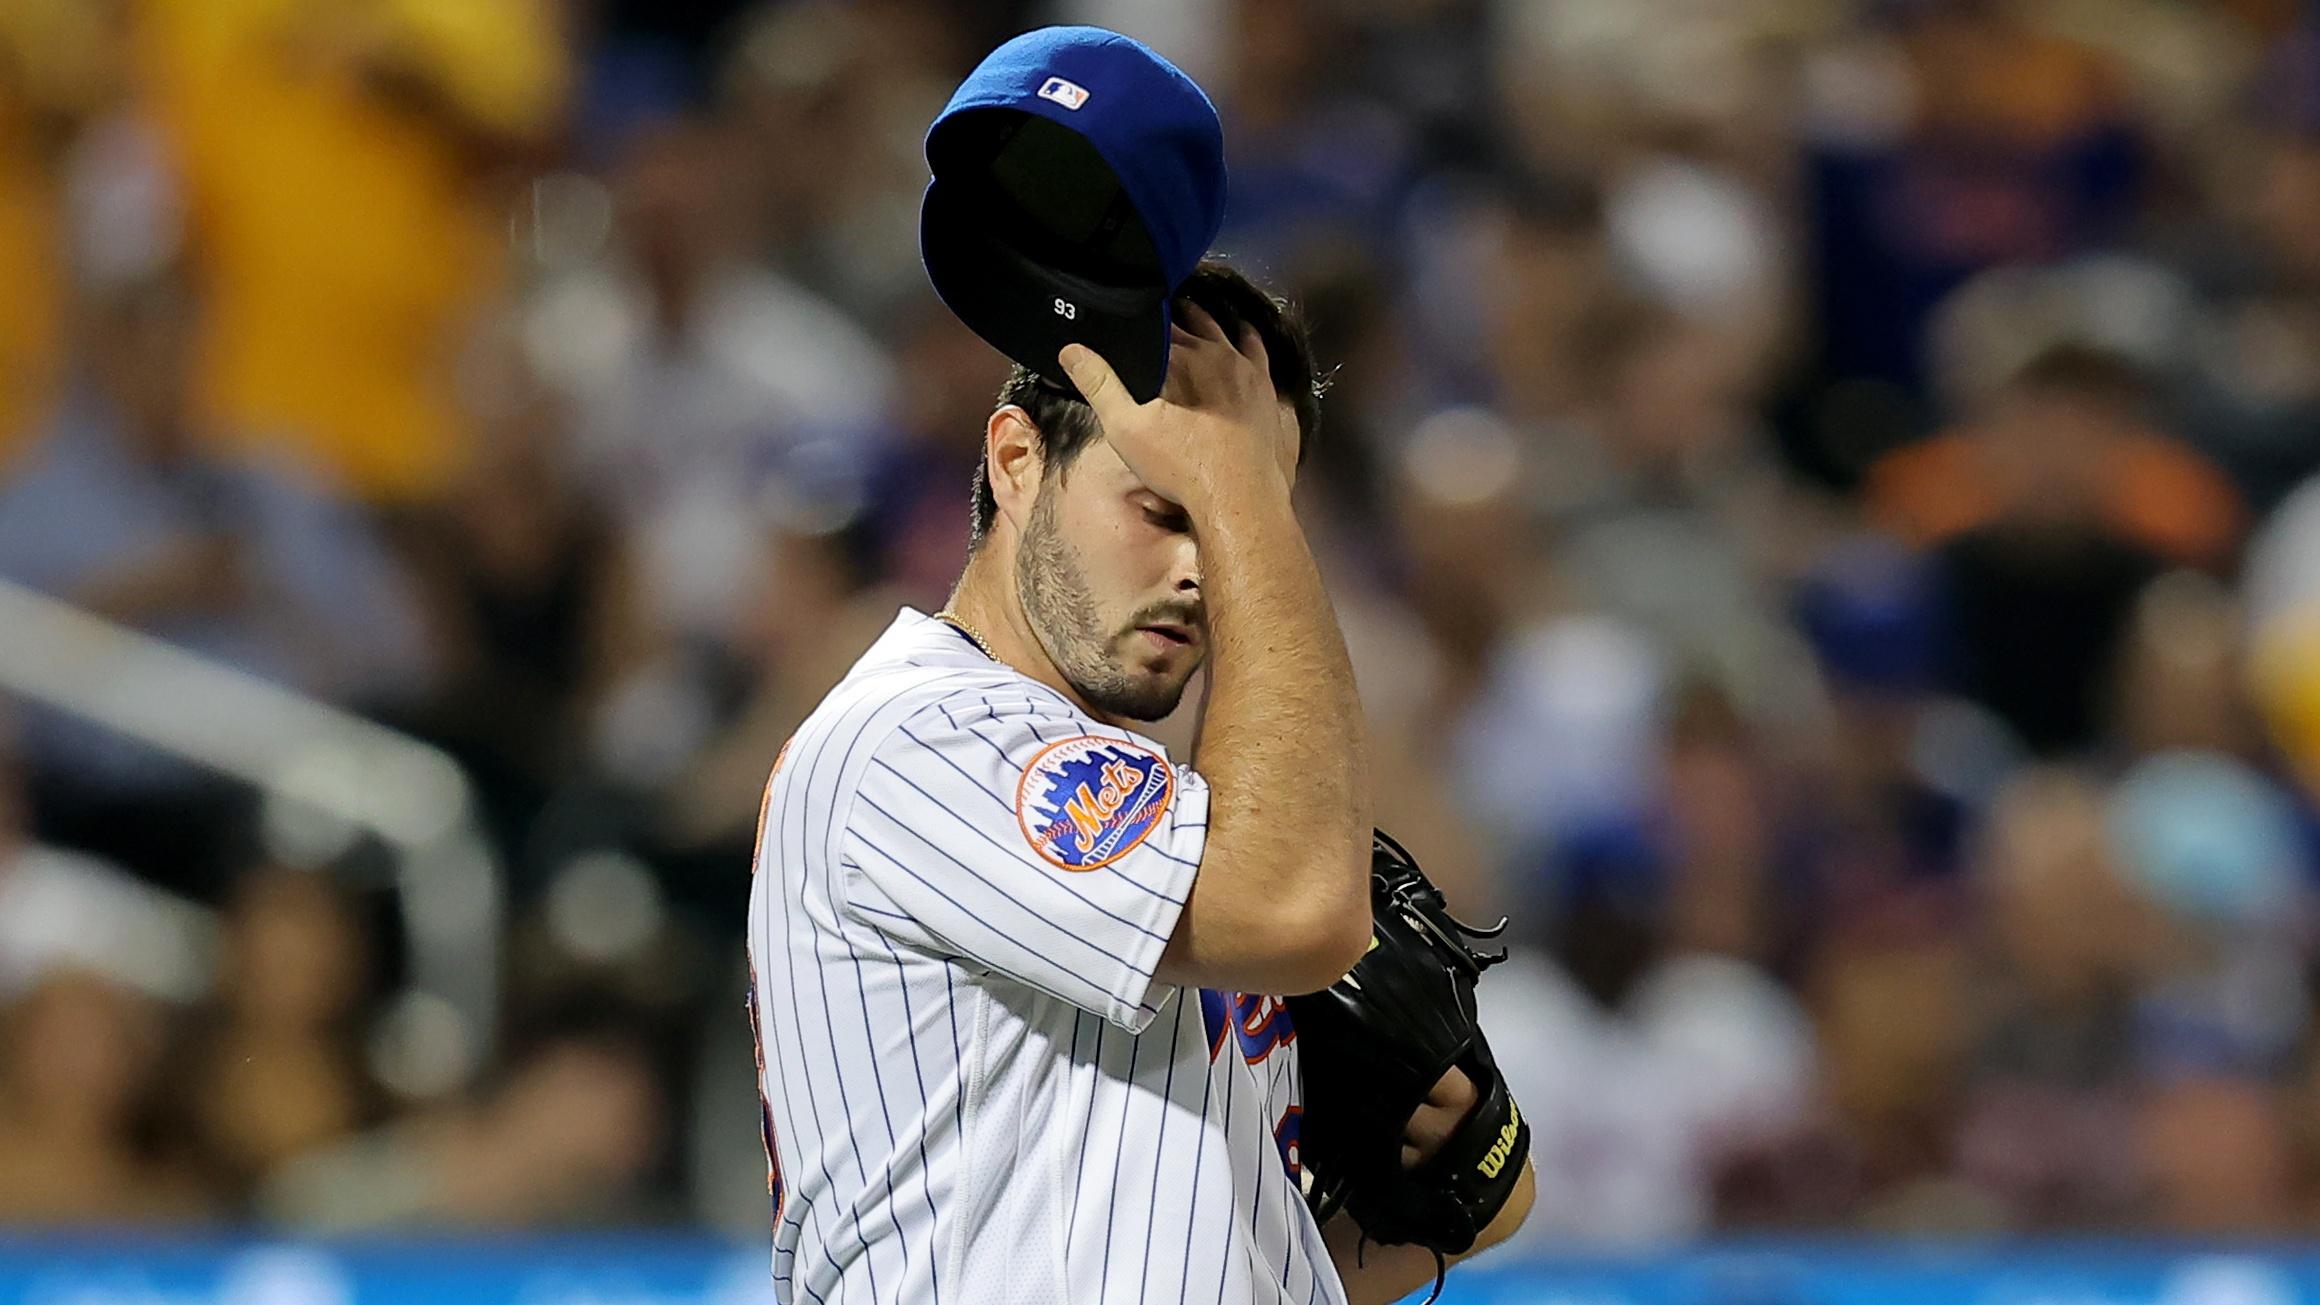 New York Mets relief pitcher Grant Hartwig (93) reacts during the seventh inning against the Pittsburgh Pirates at Citi Field / Brad Penner - USA TODAY Sports